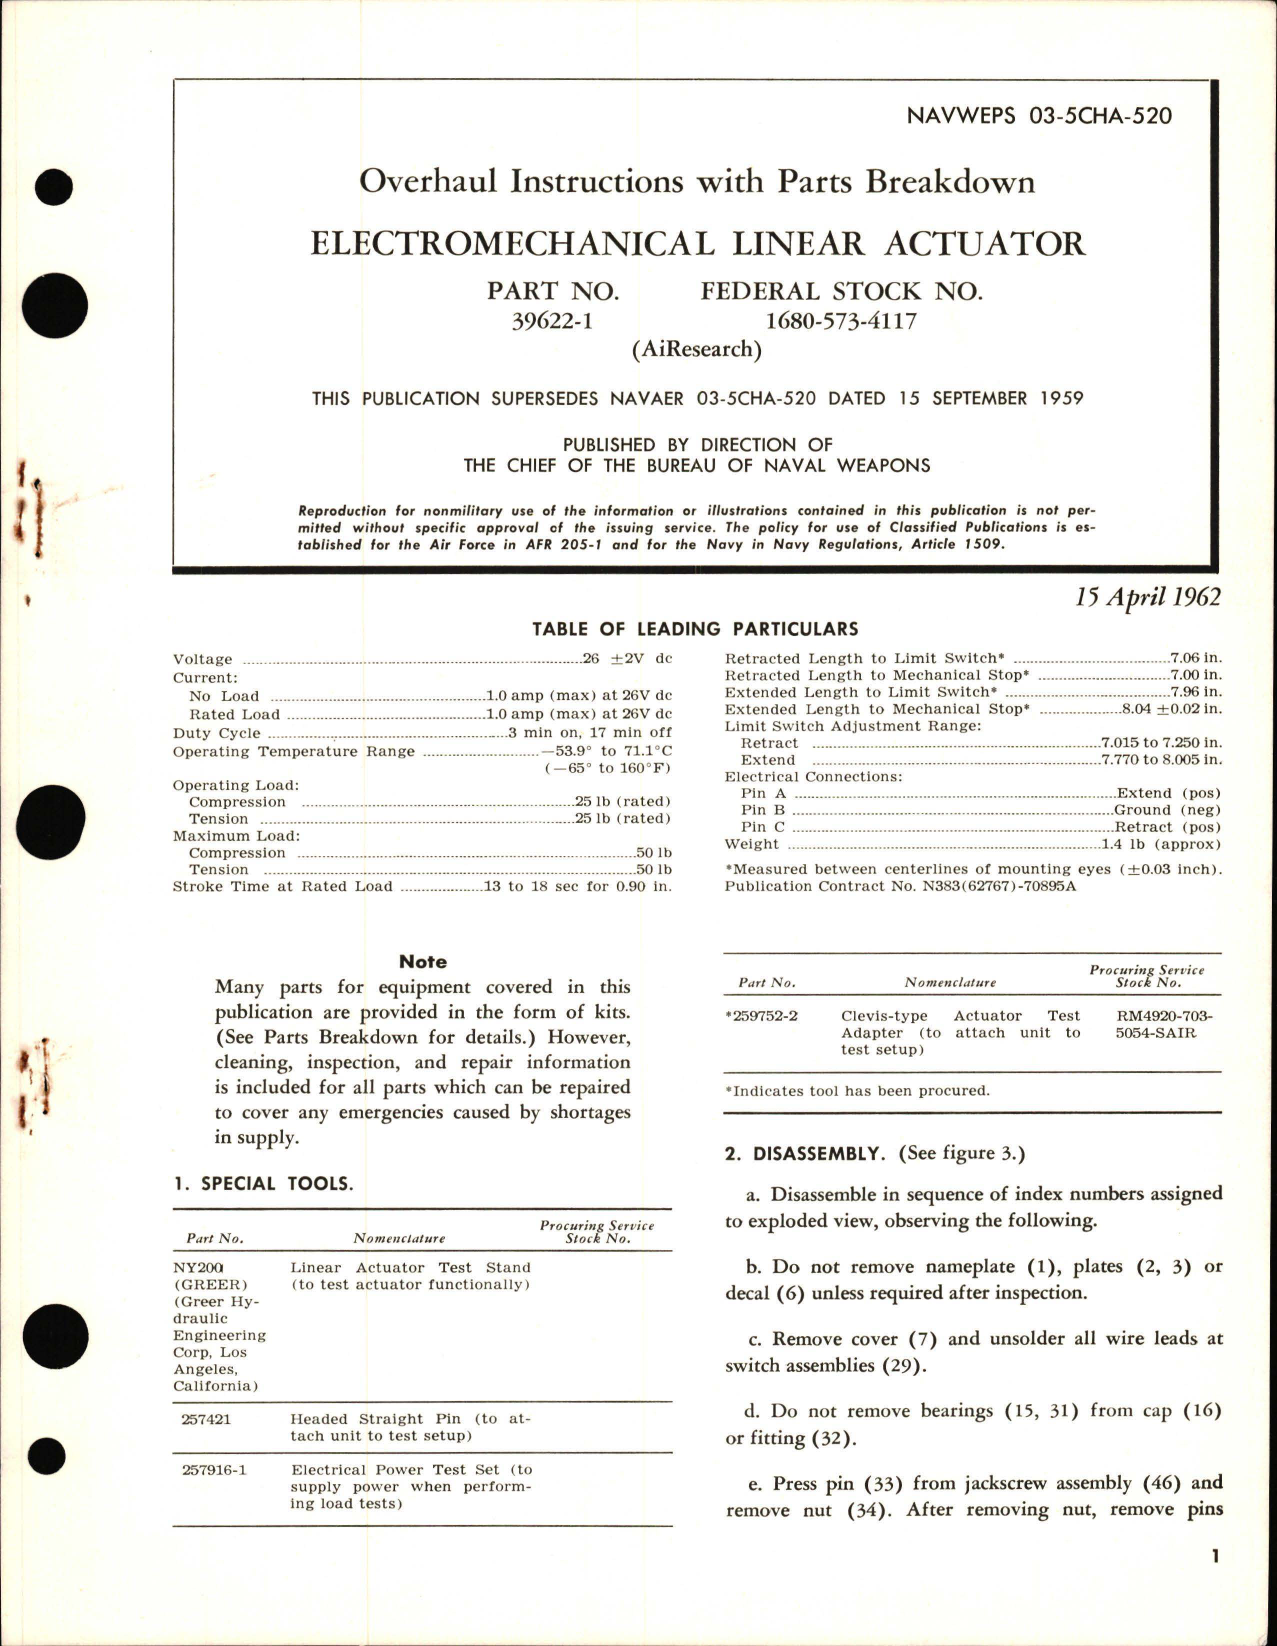 Sample page 1 from AirCorps Library document: Overhaul Instructions with Parts Breakdown Electromechanical Linear Actuator - Part 39622-1